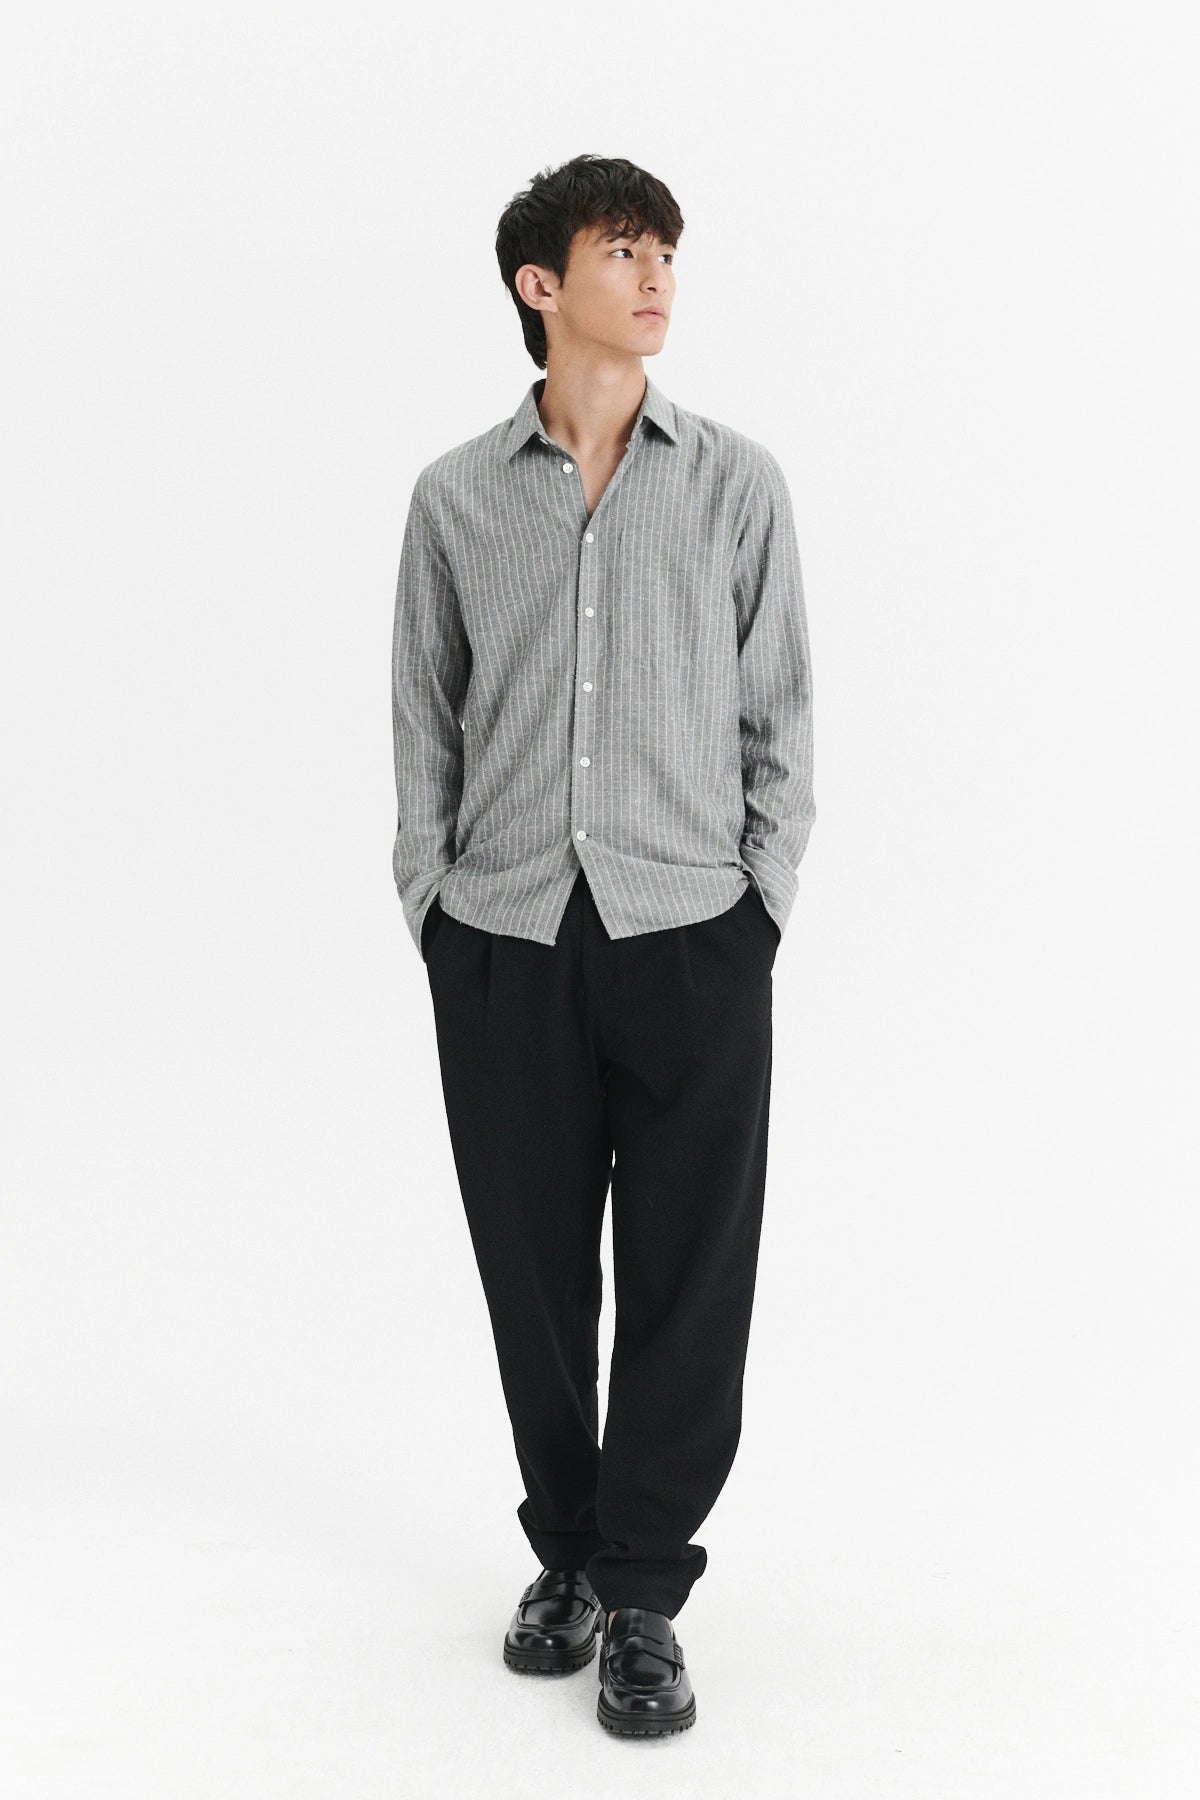 Feel Good Shirt in a Grey Drapey Blend of Portuguese Cotton and Silk